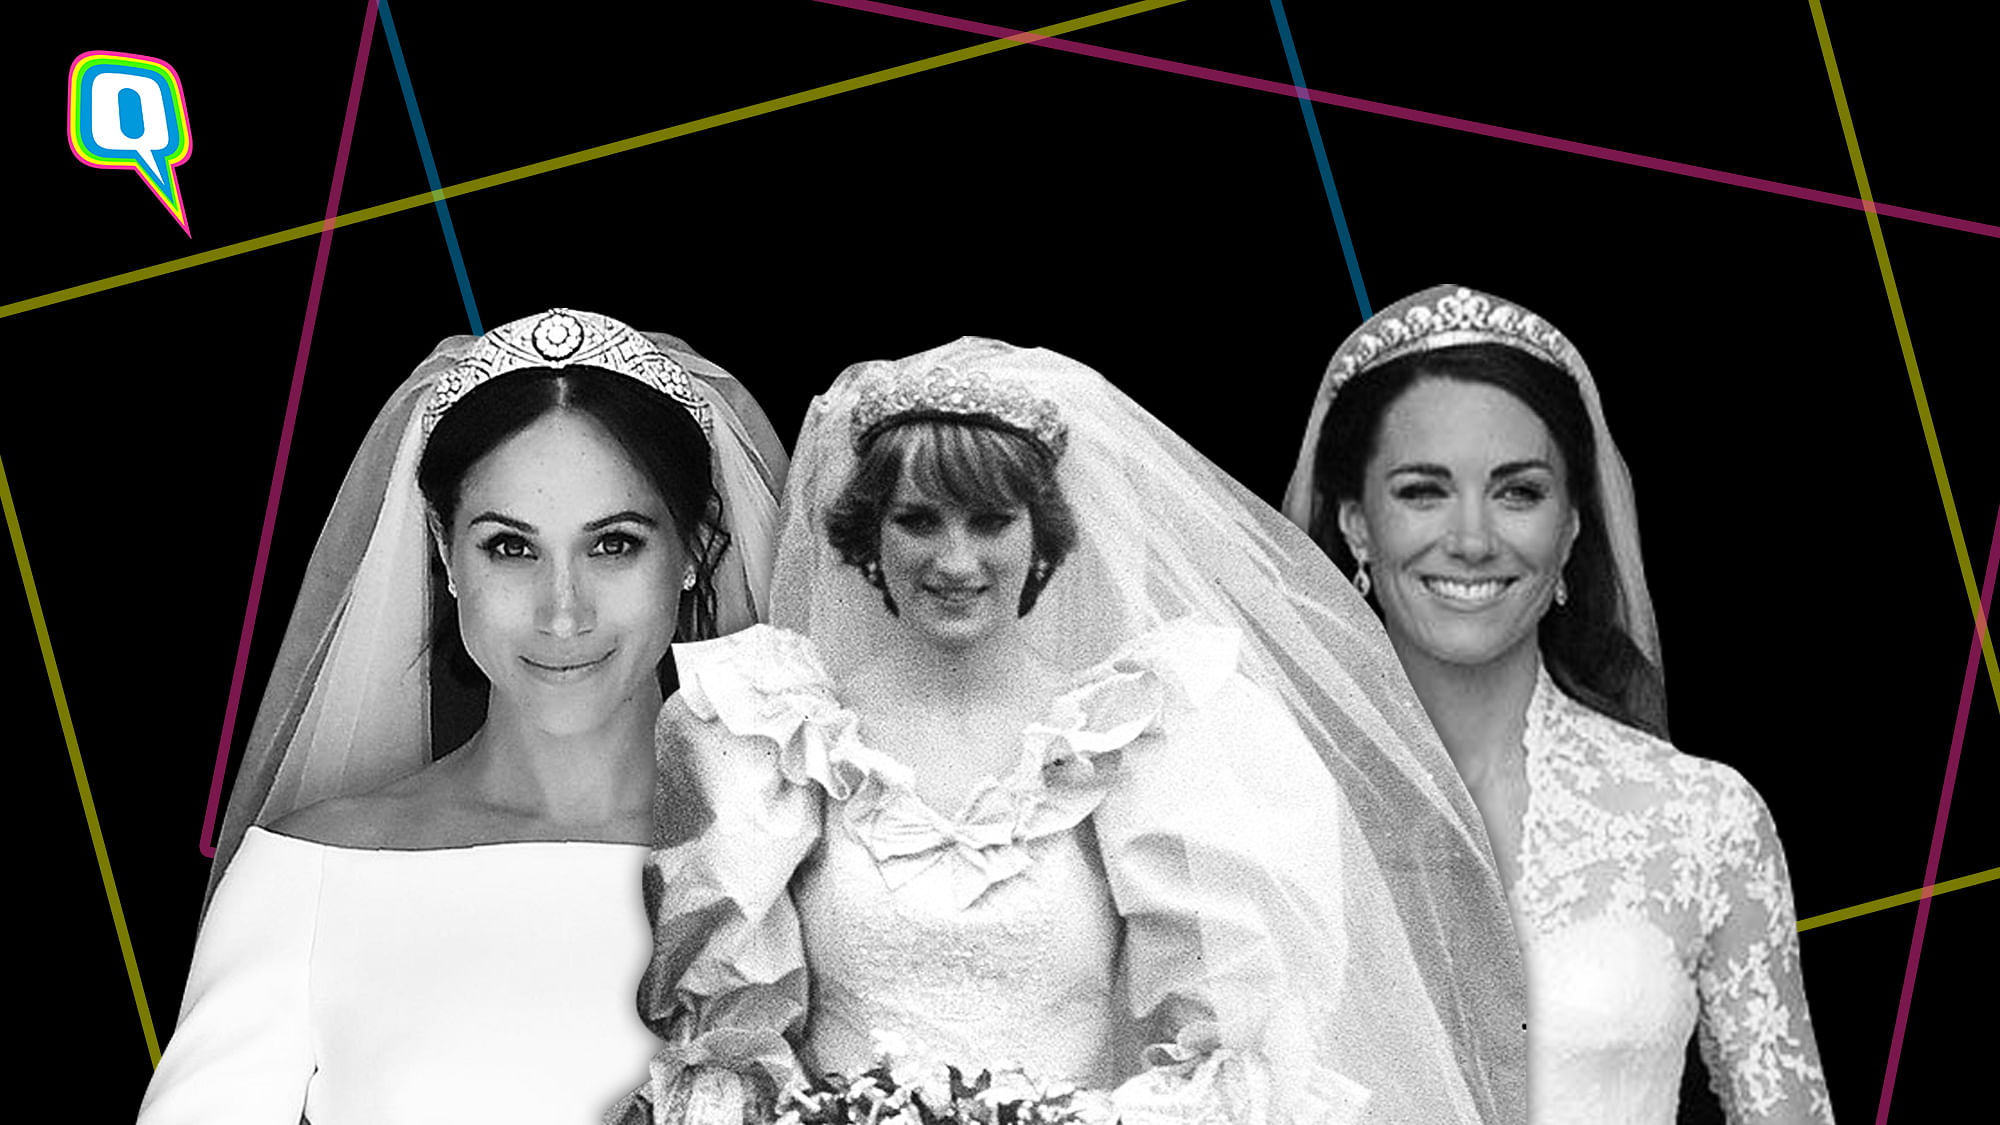 Meghan is the Diana of the moment but will she be for long?